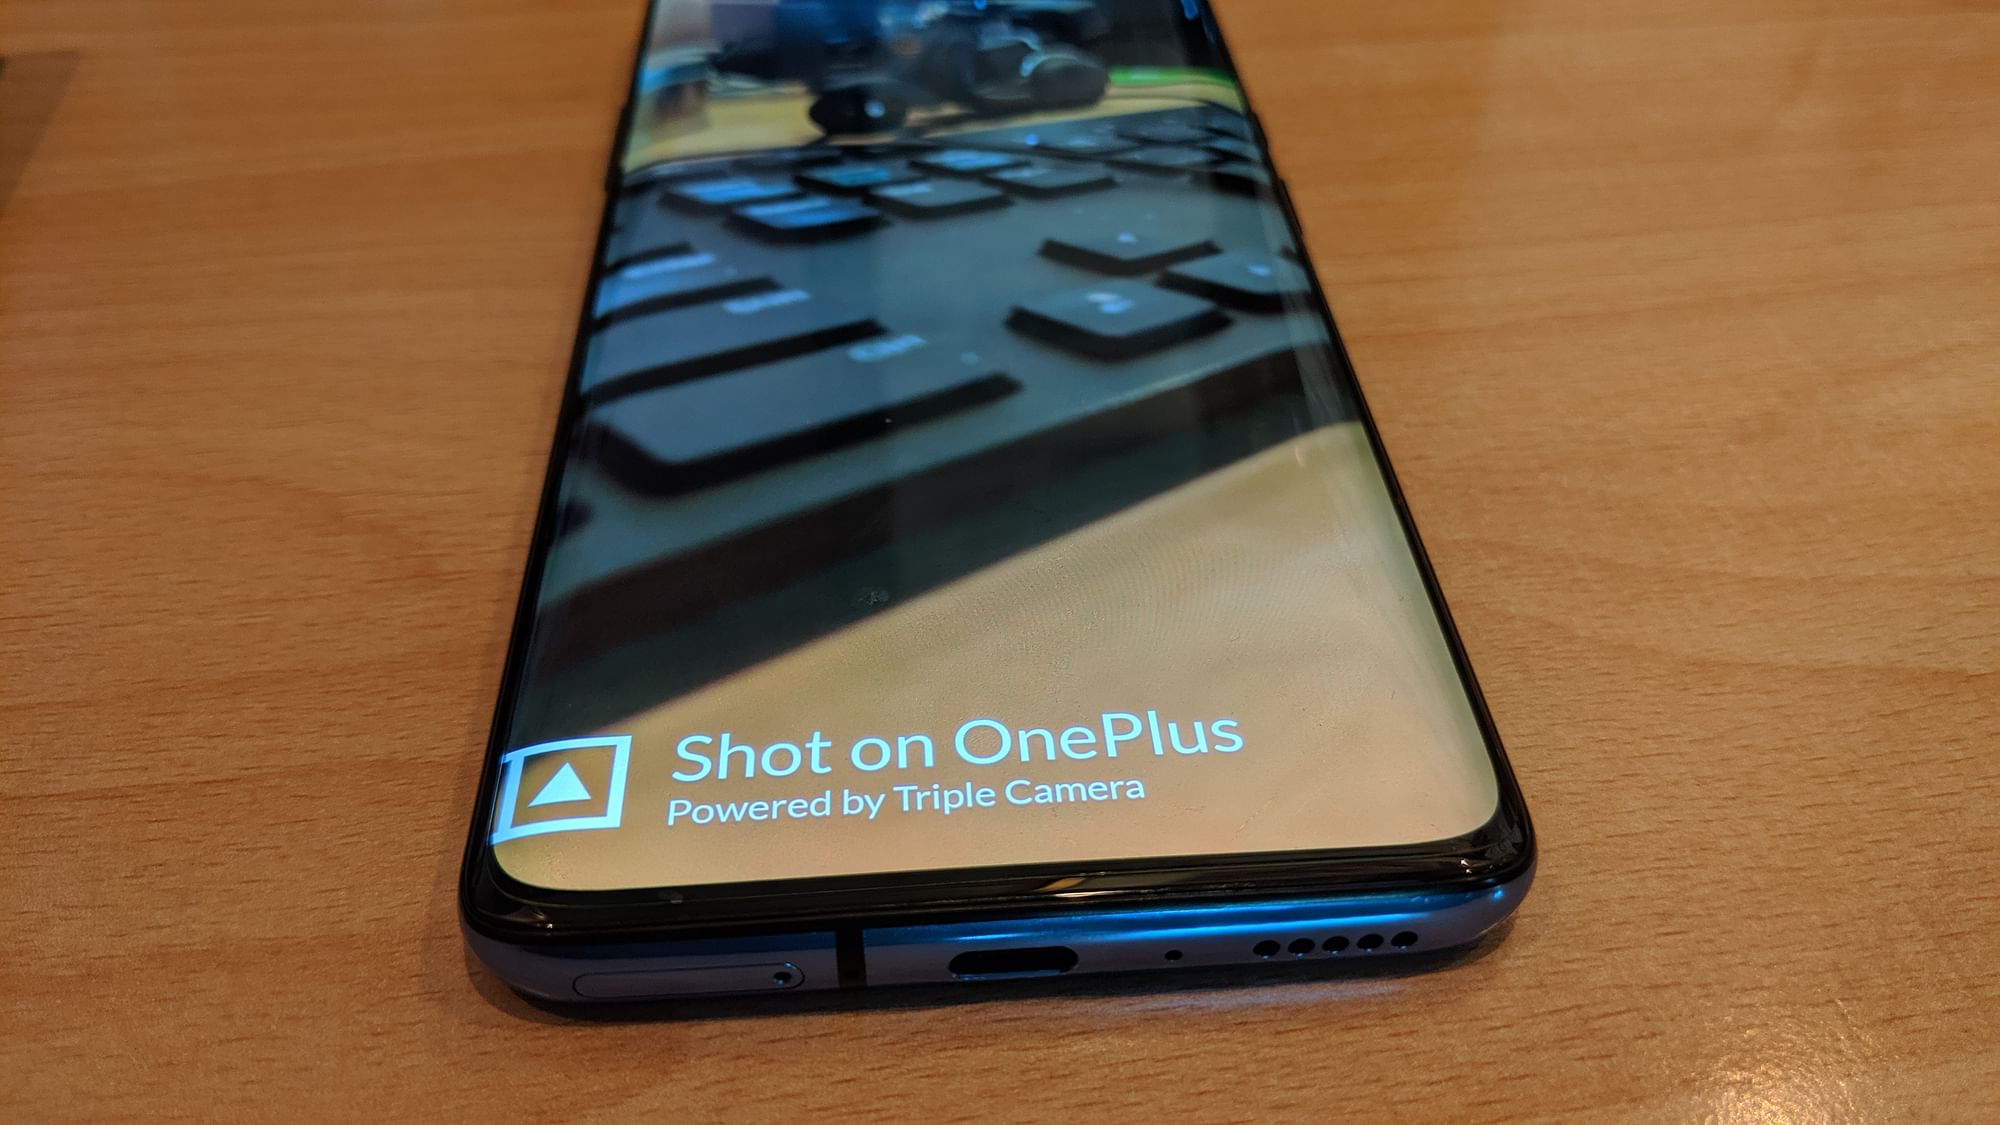 This watermark shows up when pictures clicked with camera of OnePlus phones.